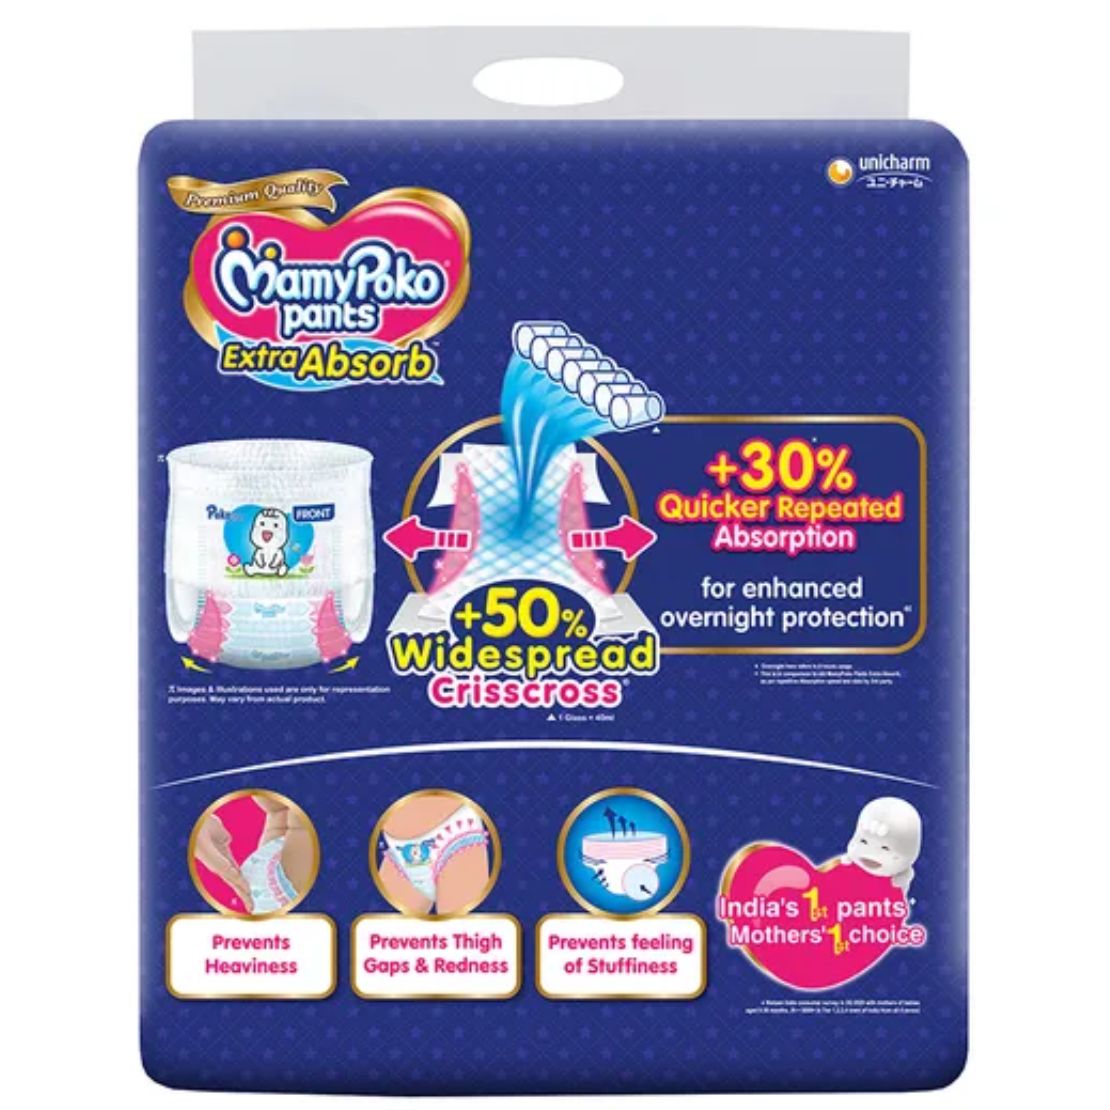 MamyPoko Pants Extra Absorb Diaper (XL, 12-17 kg, 42 pieces) Price - Buy  Online at ₹922 in India